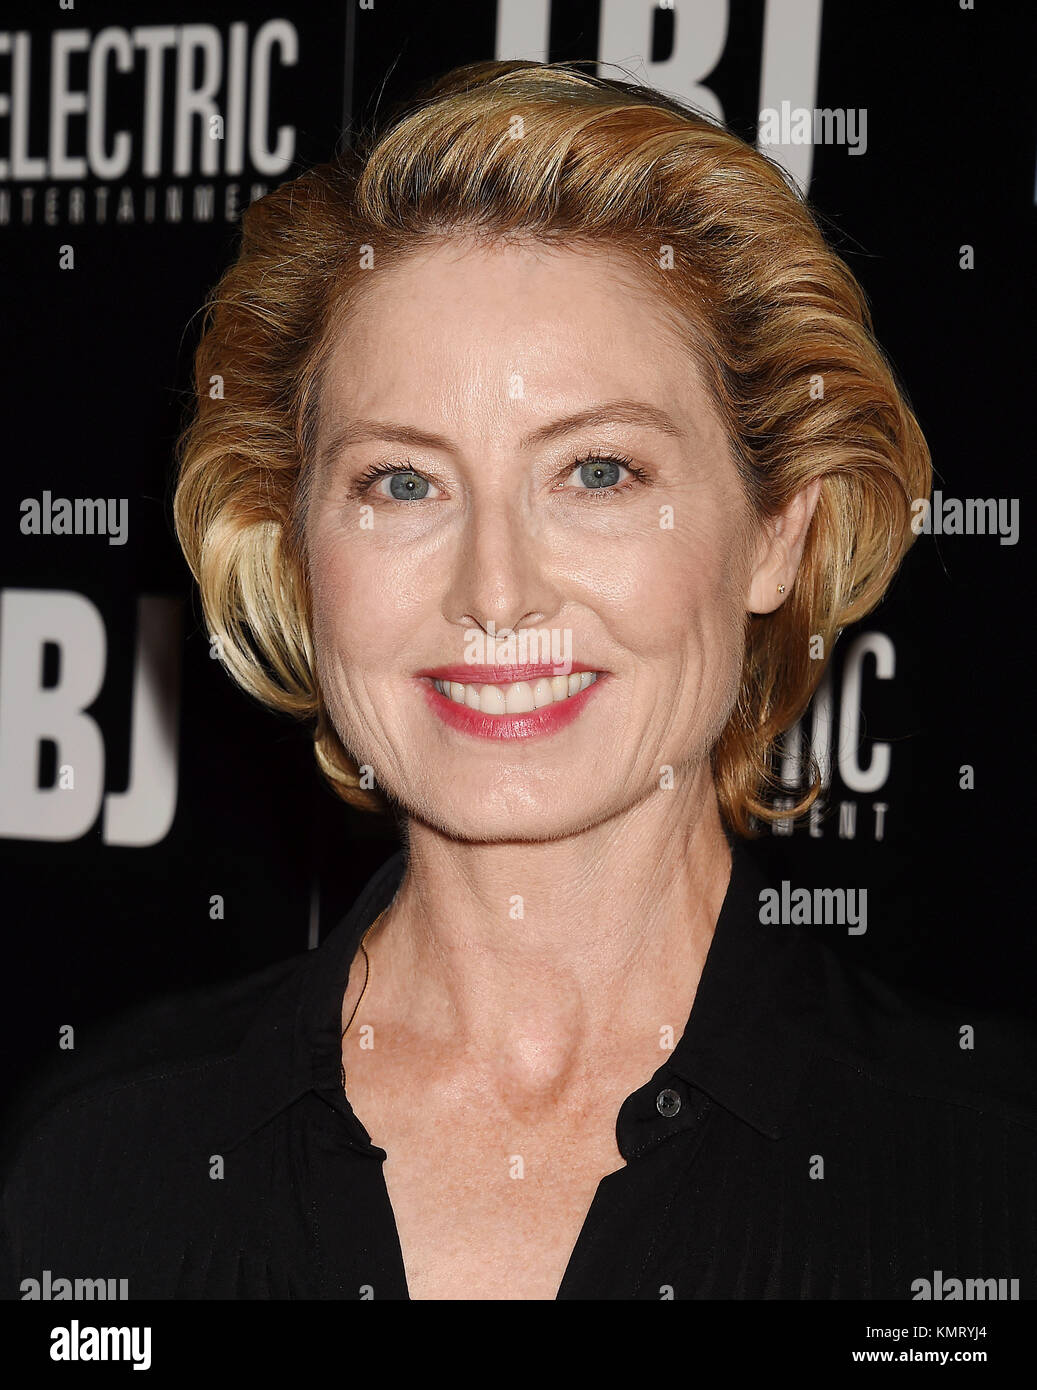 KATE BUTLER  US film actress  arrives at the premiere of Electric Entertainment's 'LBJ' at the Arclight Theatre on October 24, 2017 in Los Angeles, California. Photo: Jeffrey Mayer Stock Photo